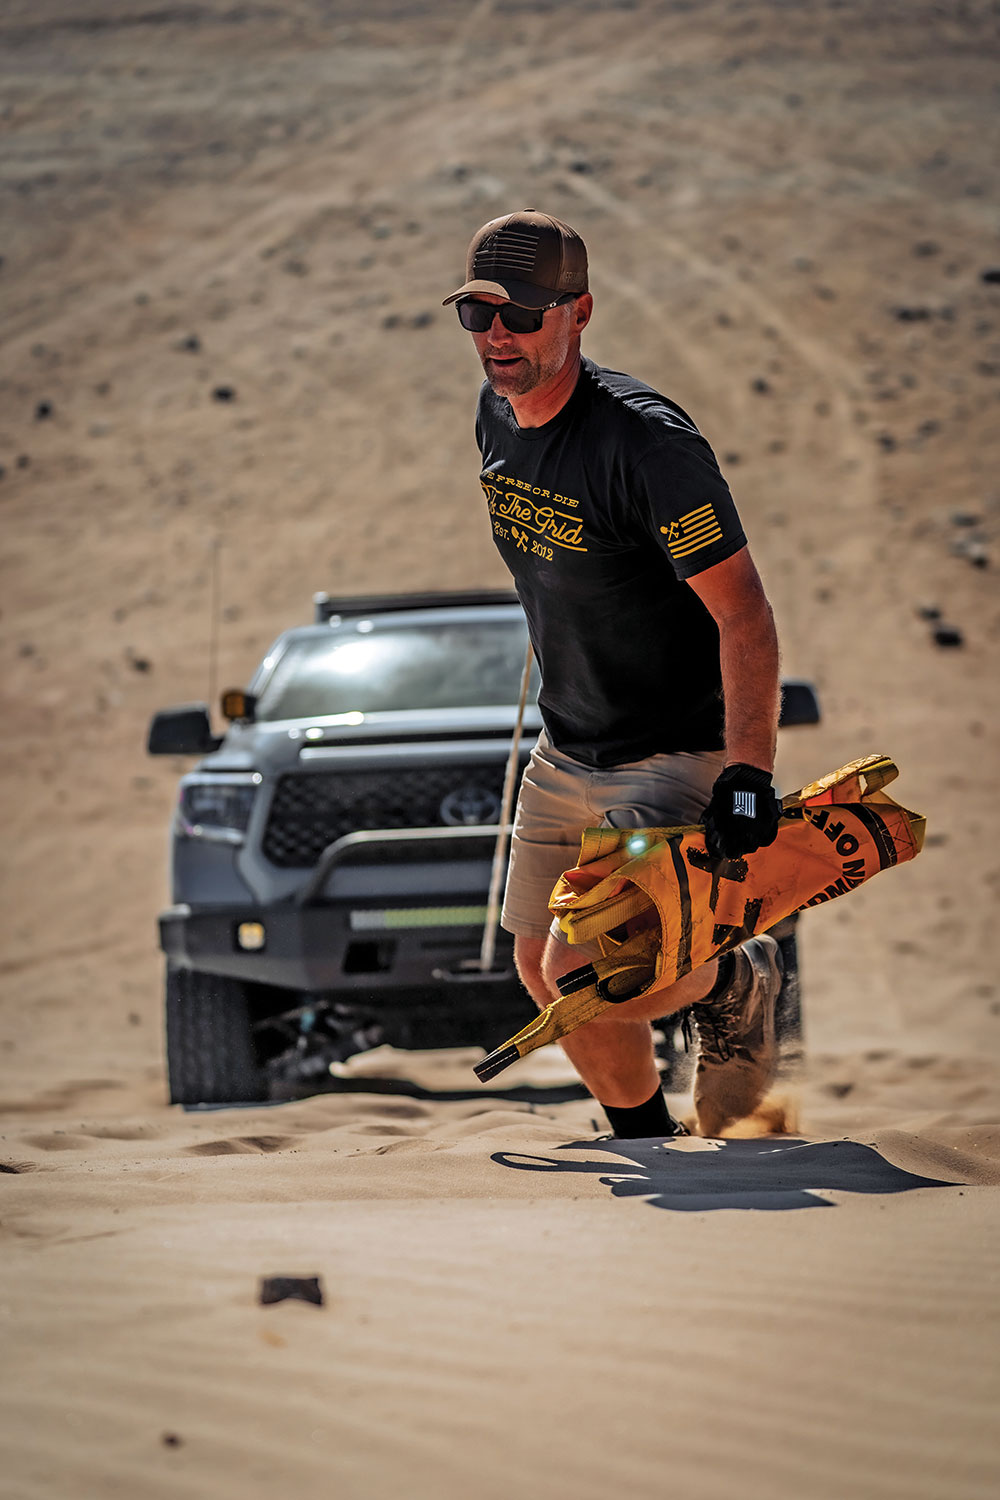 Samuel, in a black shirt and hat, carries a Deadman Offroad recovery anchor uphill from the truck.